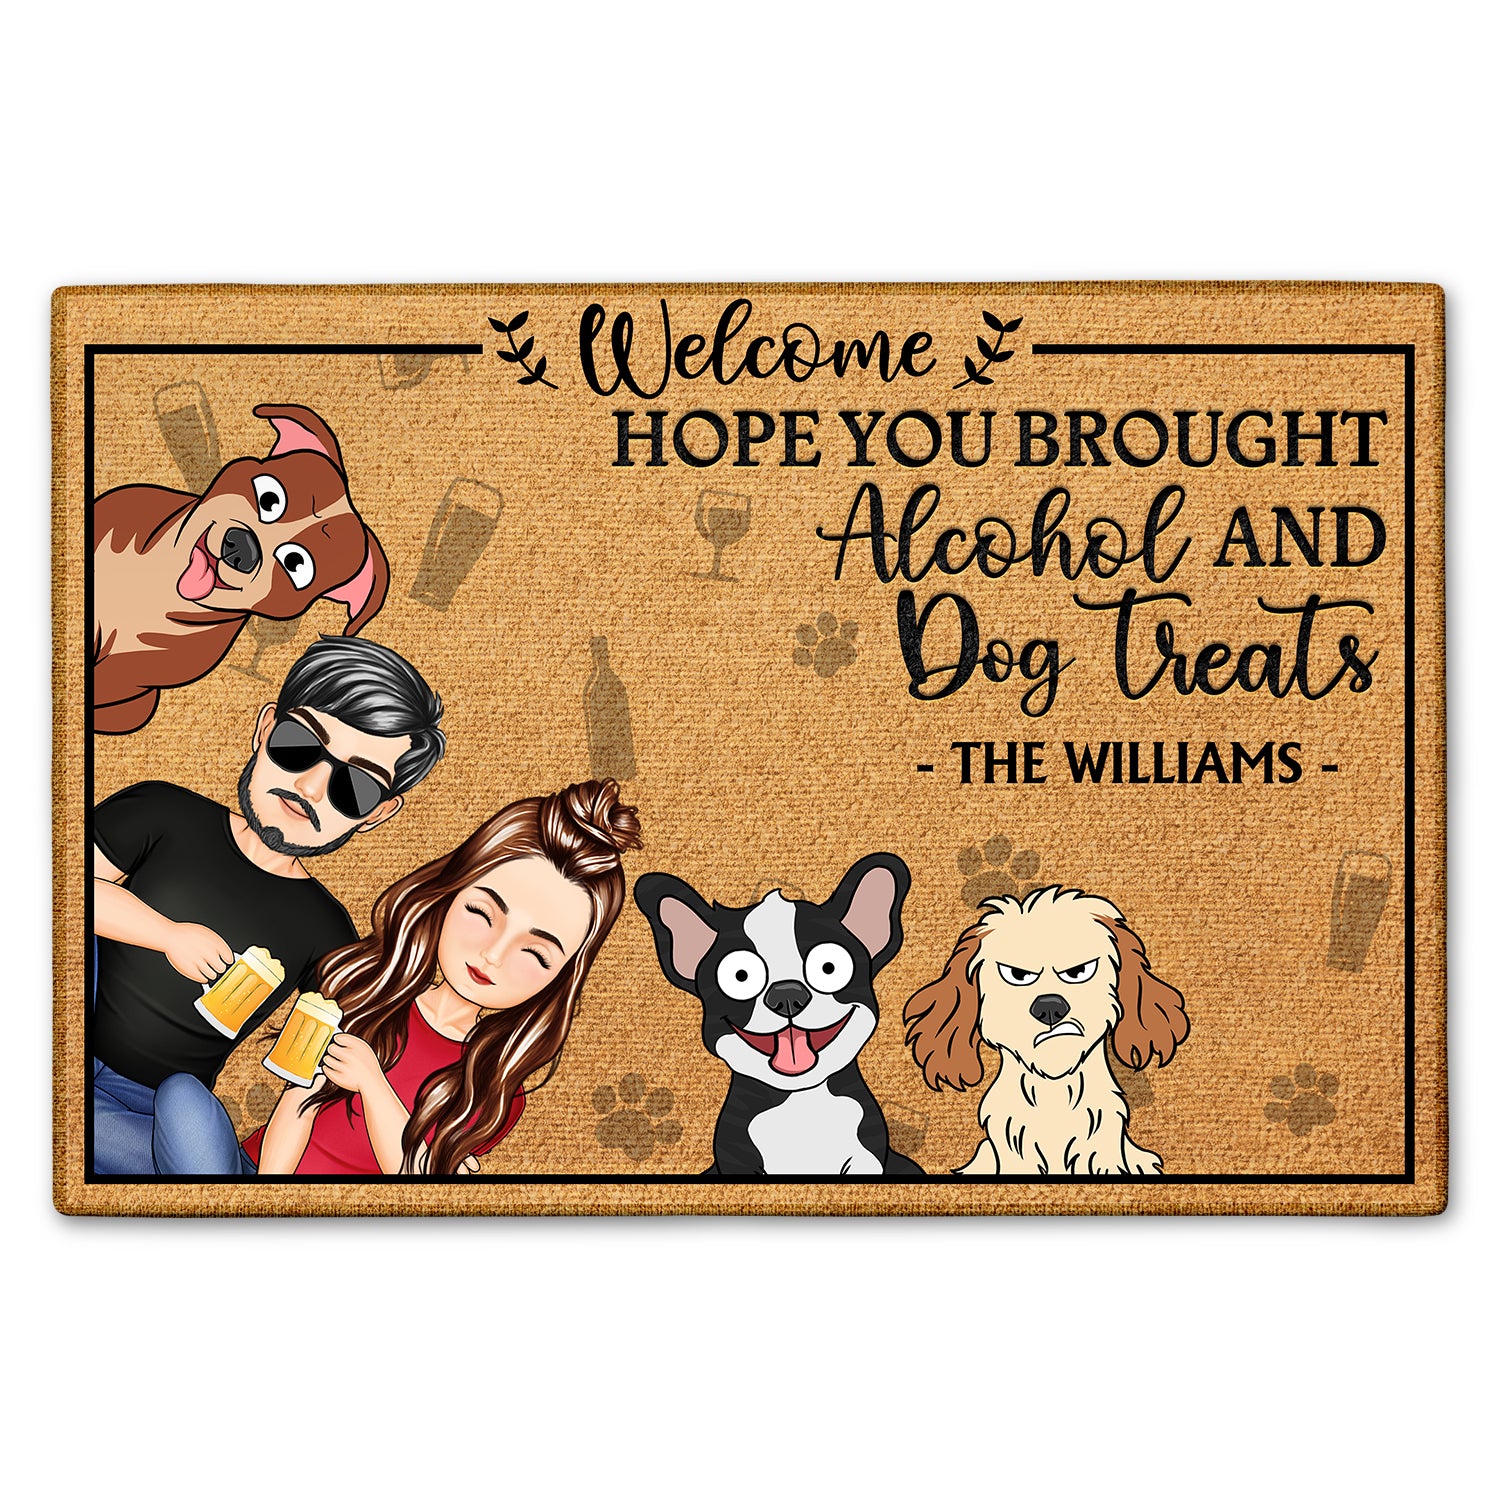 Hope You Brought Alcohol And Dog Treats - Home Decor For Family, Couples, Pet Lovers - Personalized Doormat